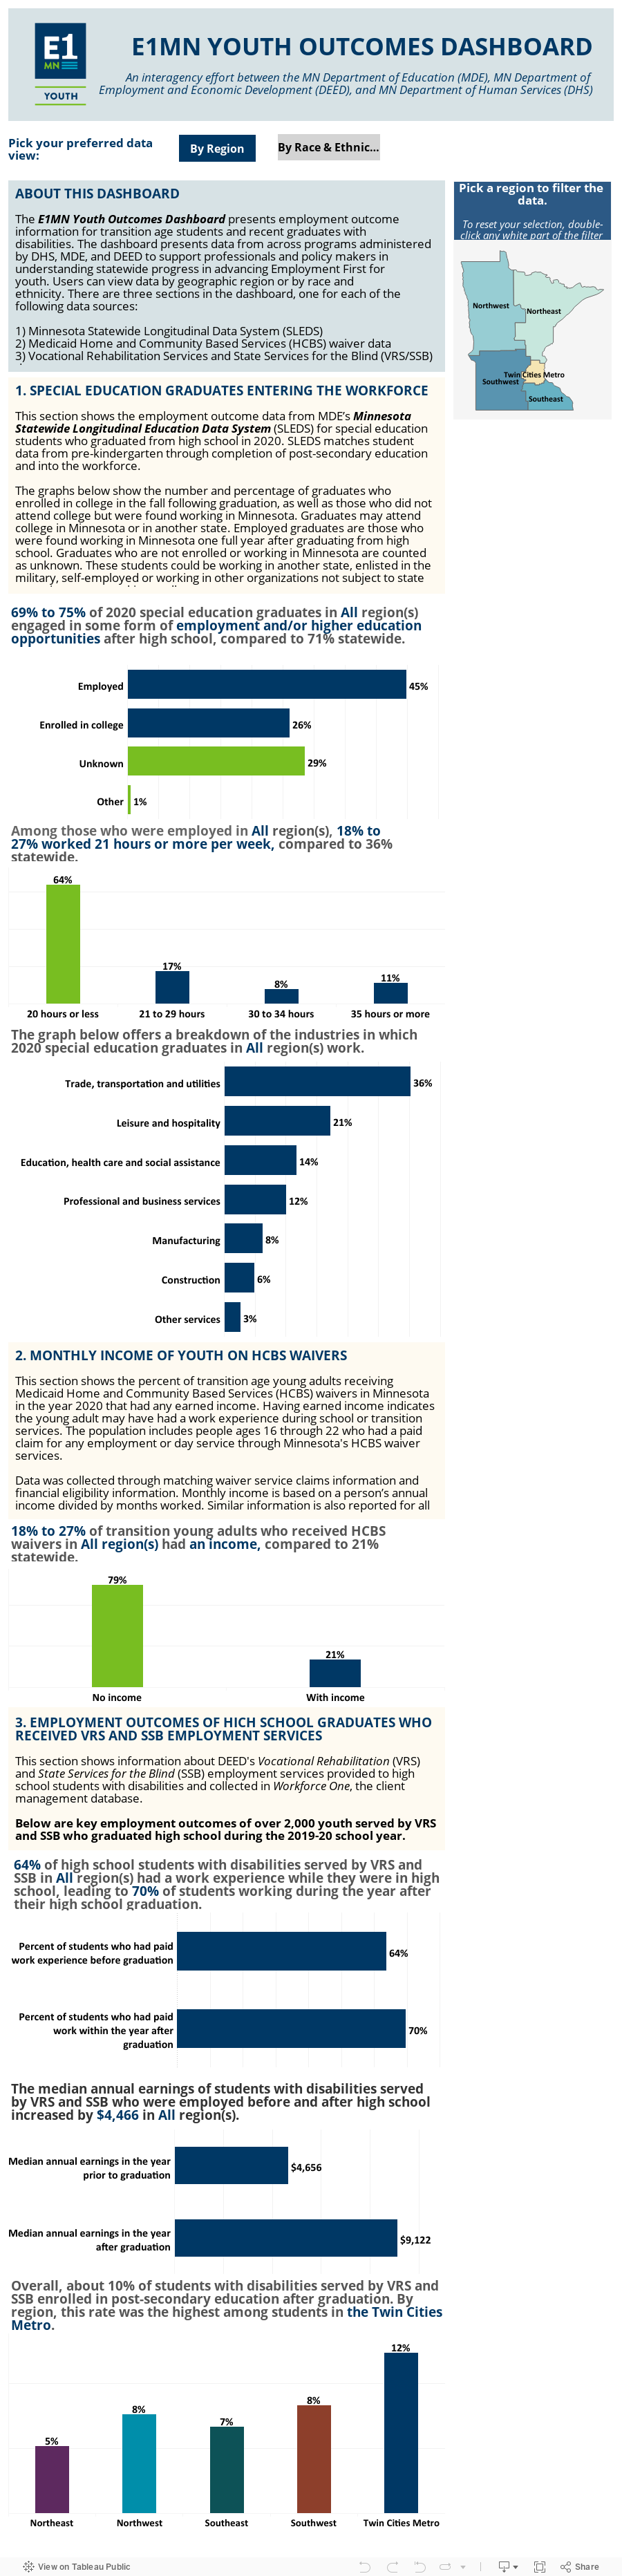 E1MN YOUTH OUTCOMES DASHBOARD An interagency effort between the MN Department of Education (MDE), MN Department of Employment and Economic Development (DEED), and MN Department of Human Services (DHS) 